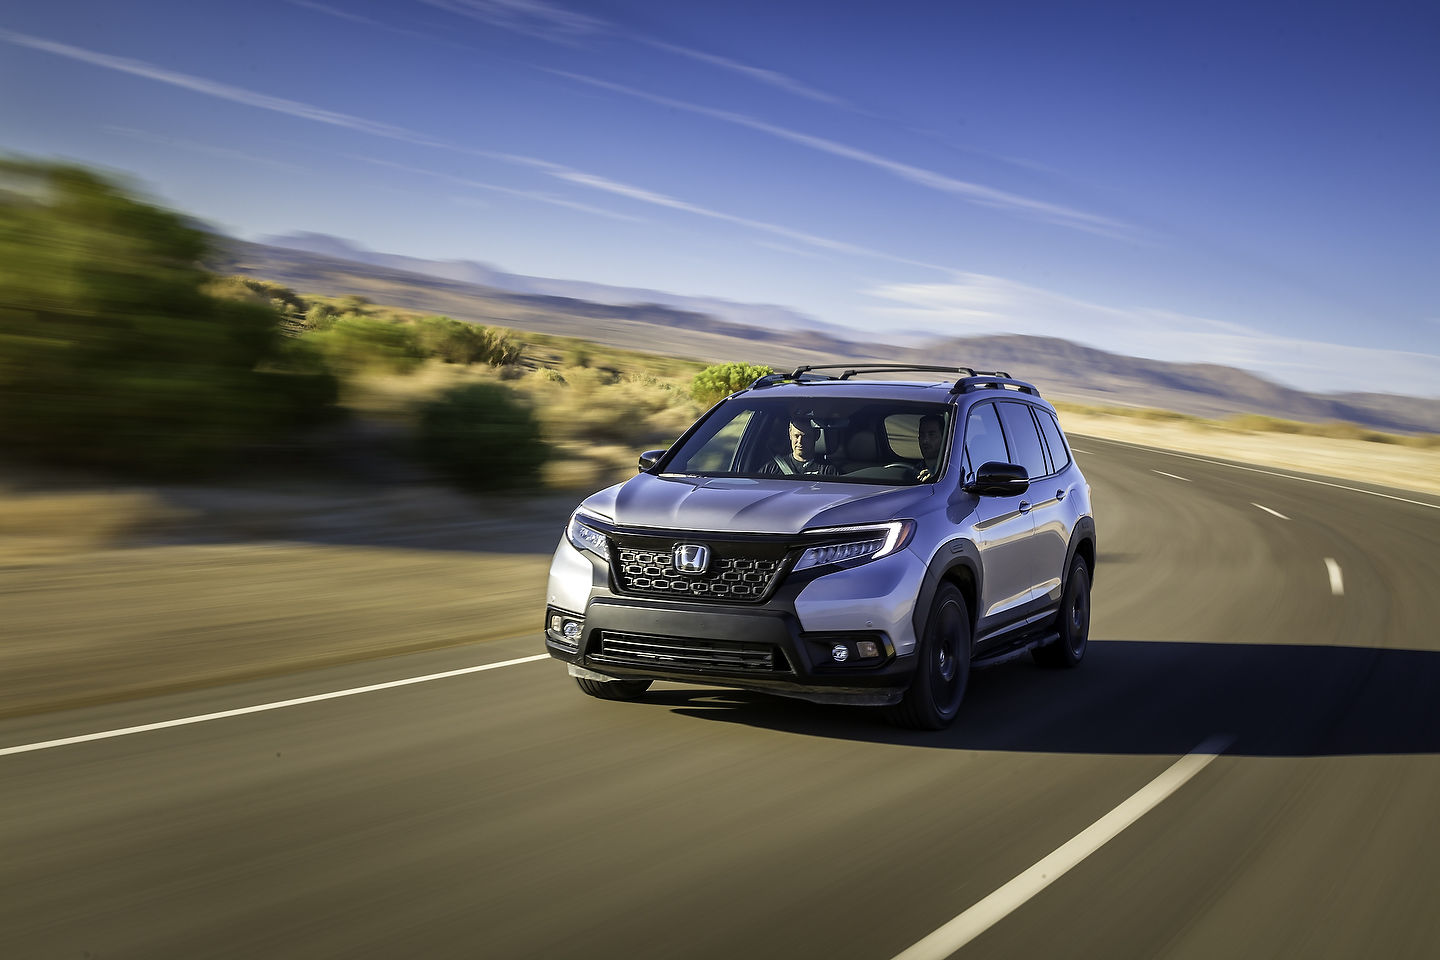 Here's what experts say about the 2019 Honda Passport